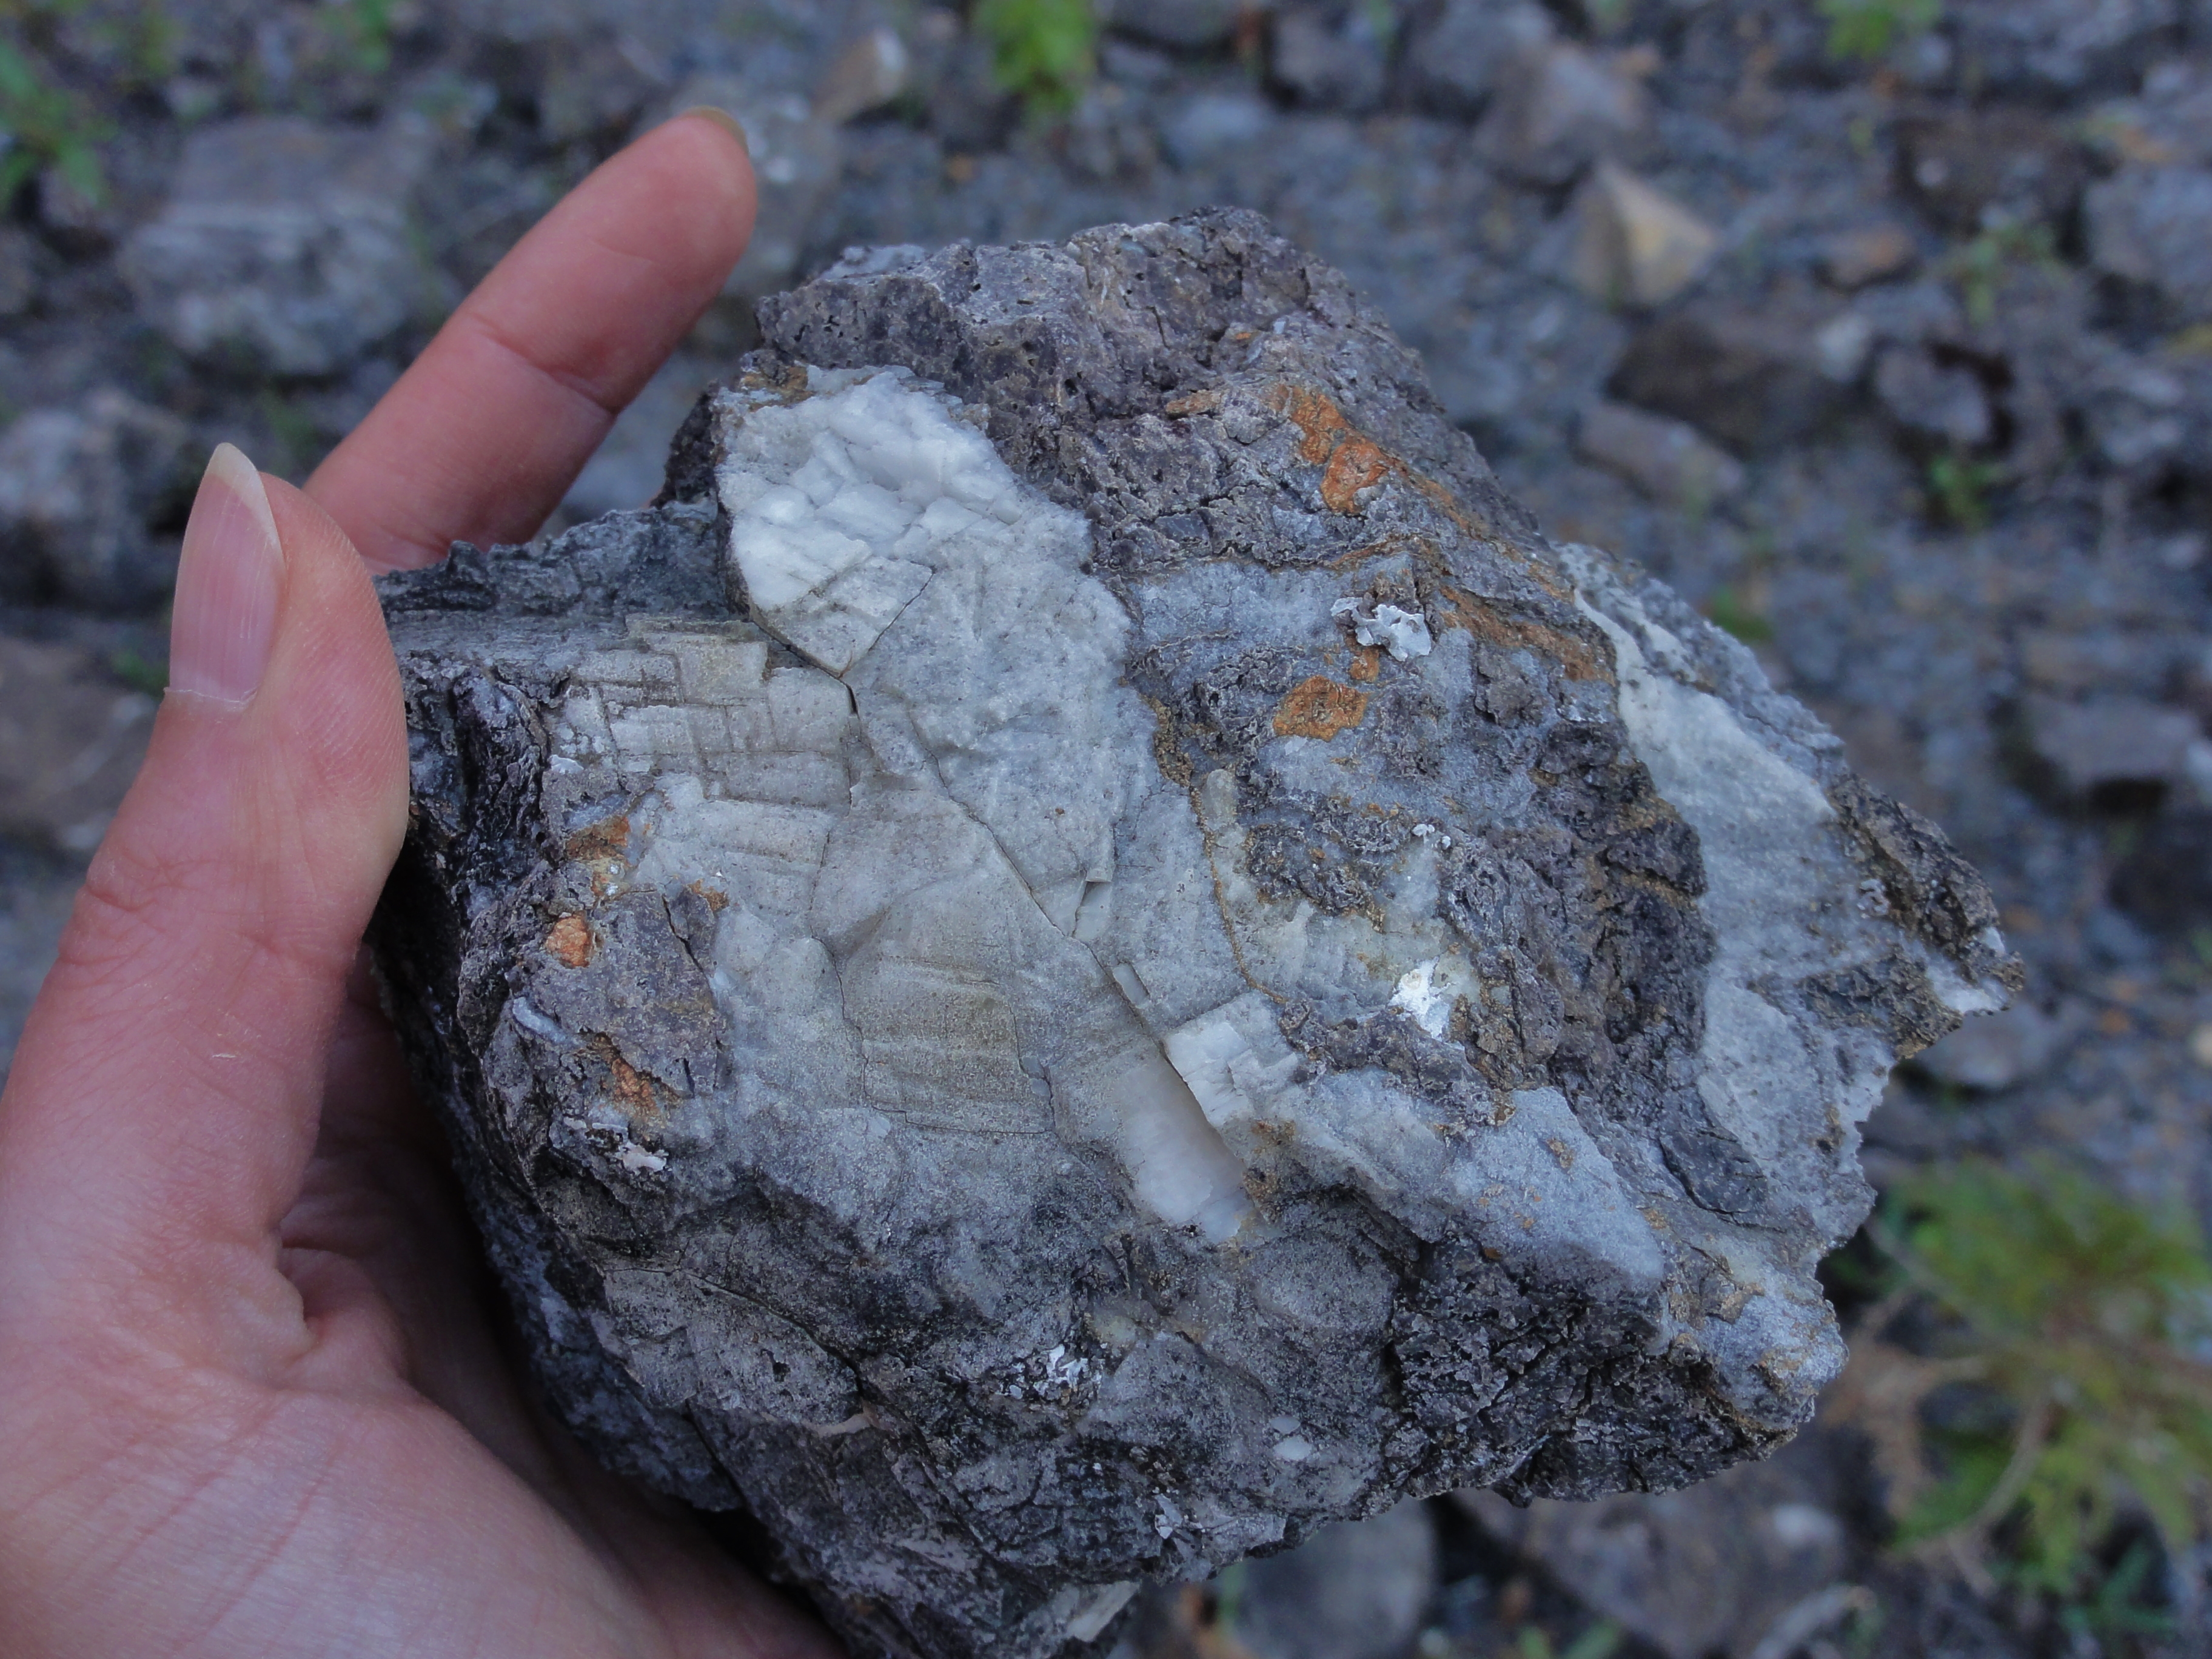 Calcite crystals in limestone. Hand sample from quarry in Concrete, WA.